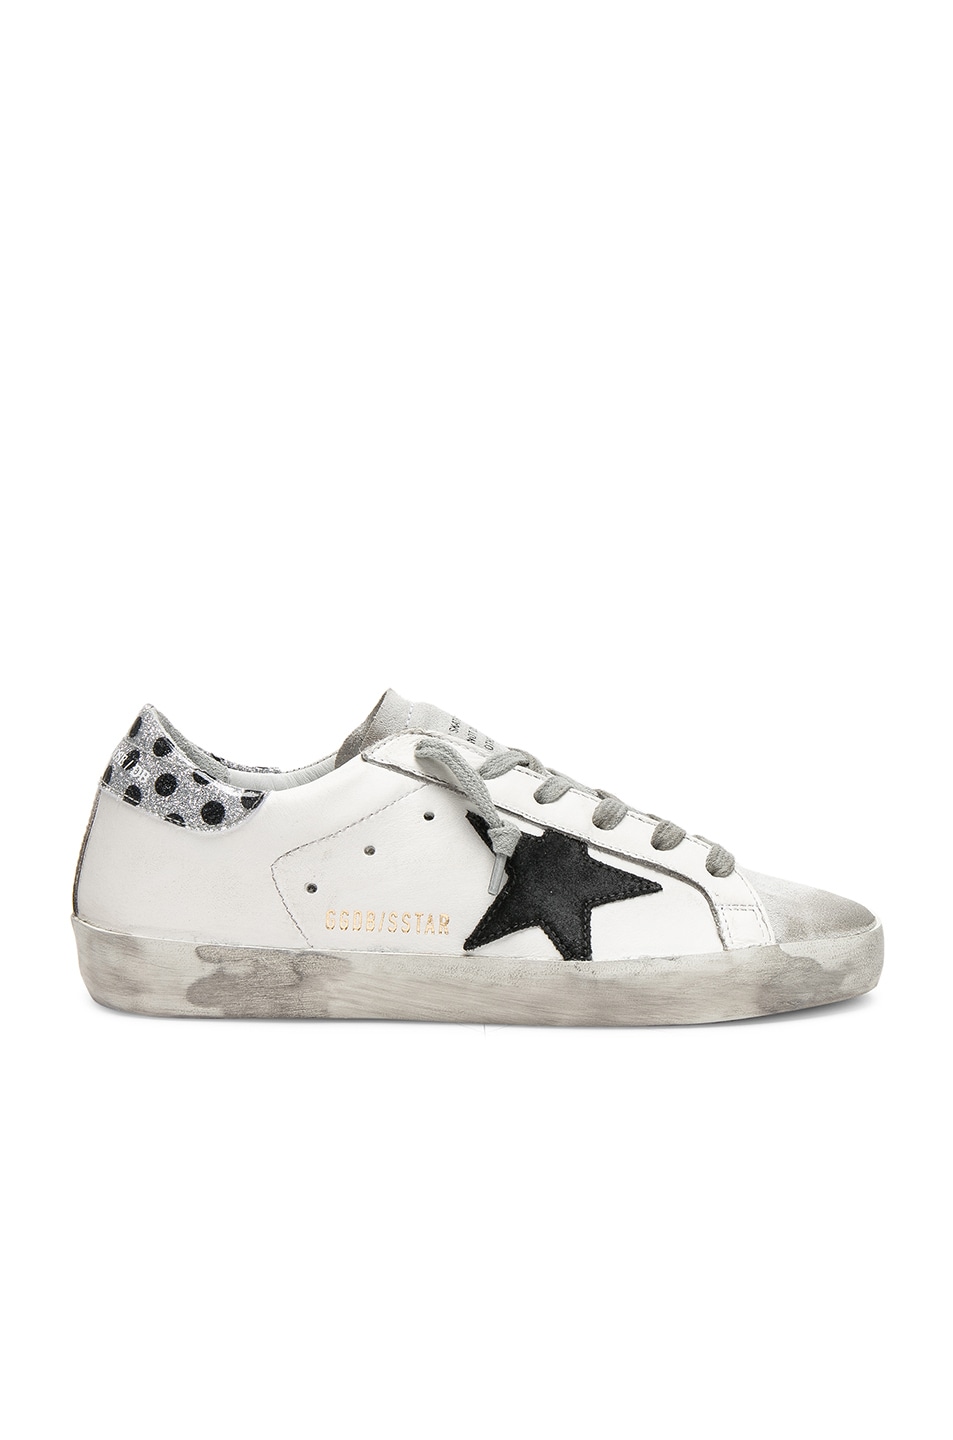 Image 1 of Golden Goose Superstar Sneakers in White, Silver & Black Pois